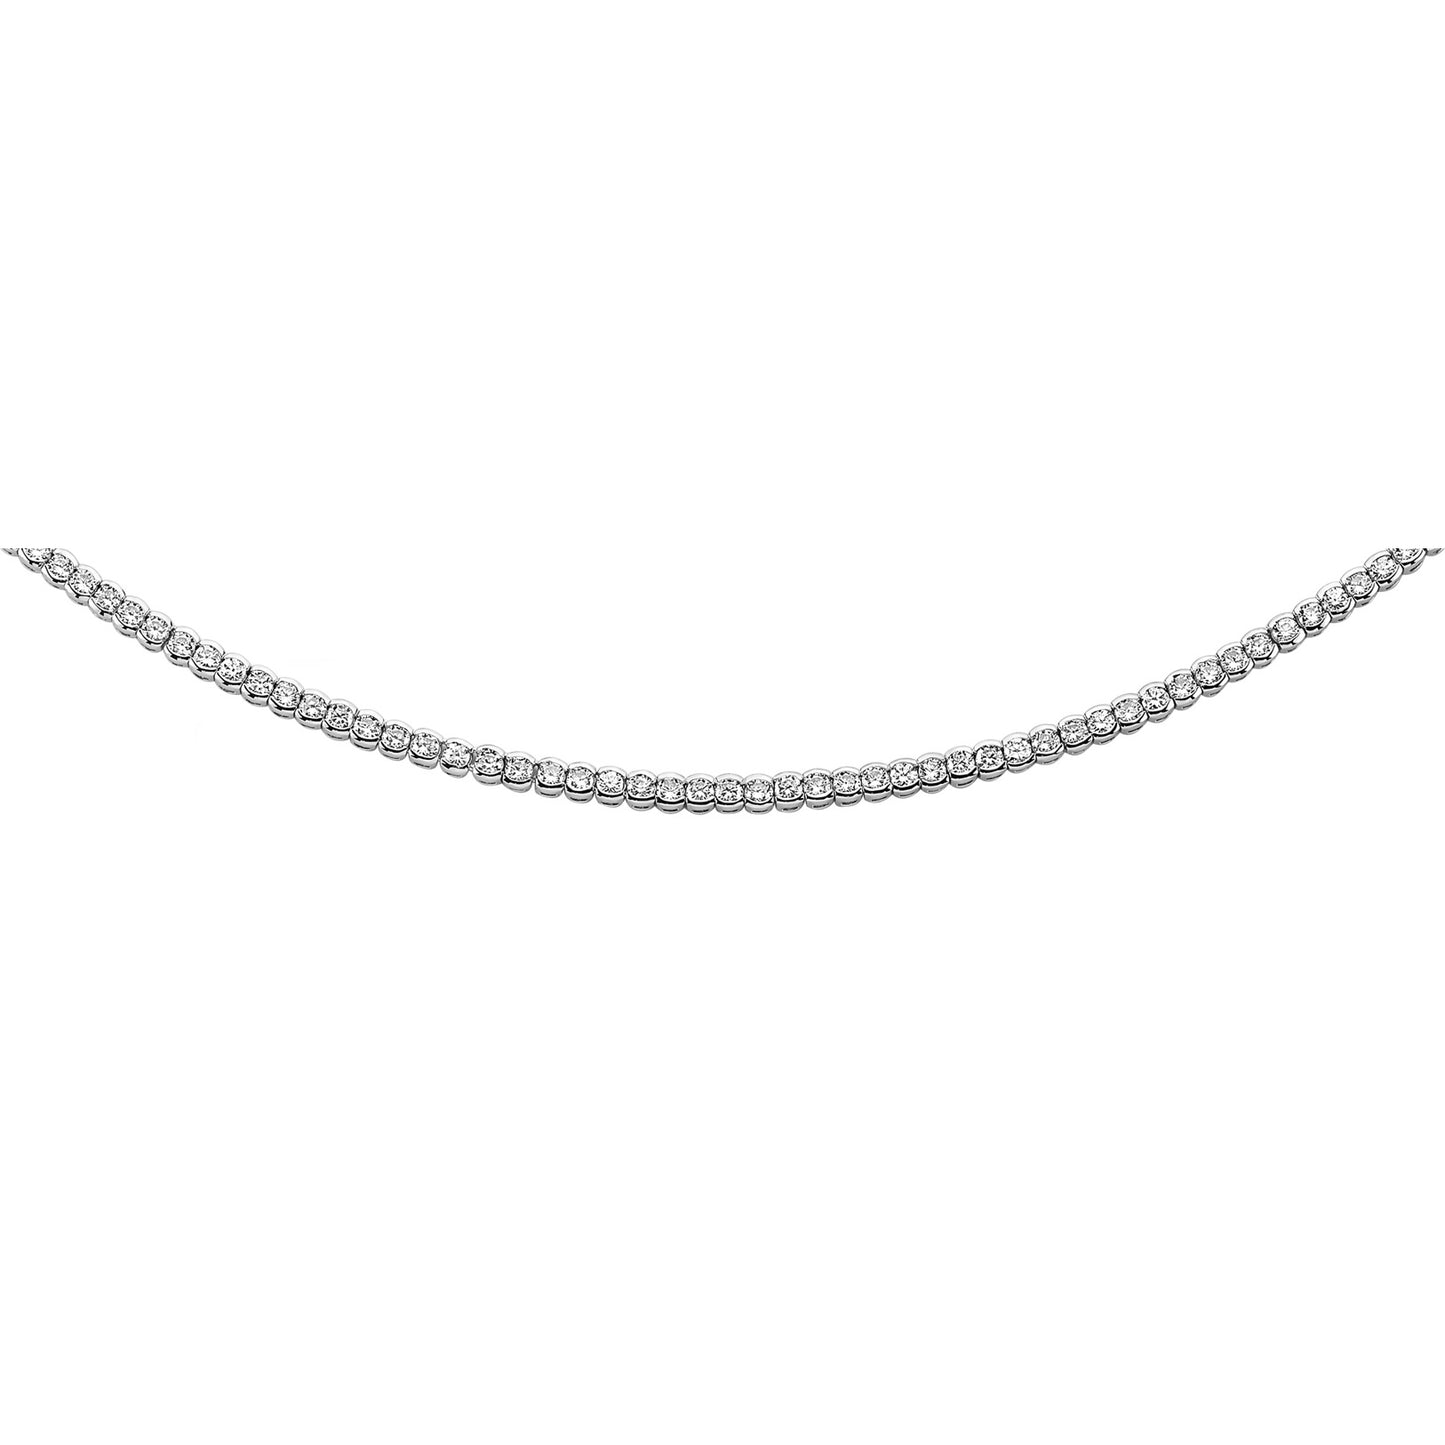 Silver  CZ Eternity Rubover Tennis Necklace 4mm 17 inch - GVK089